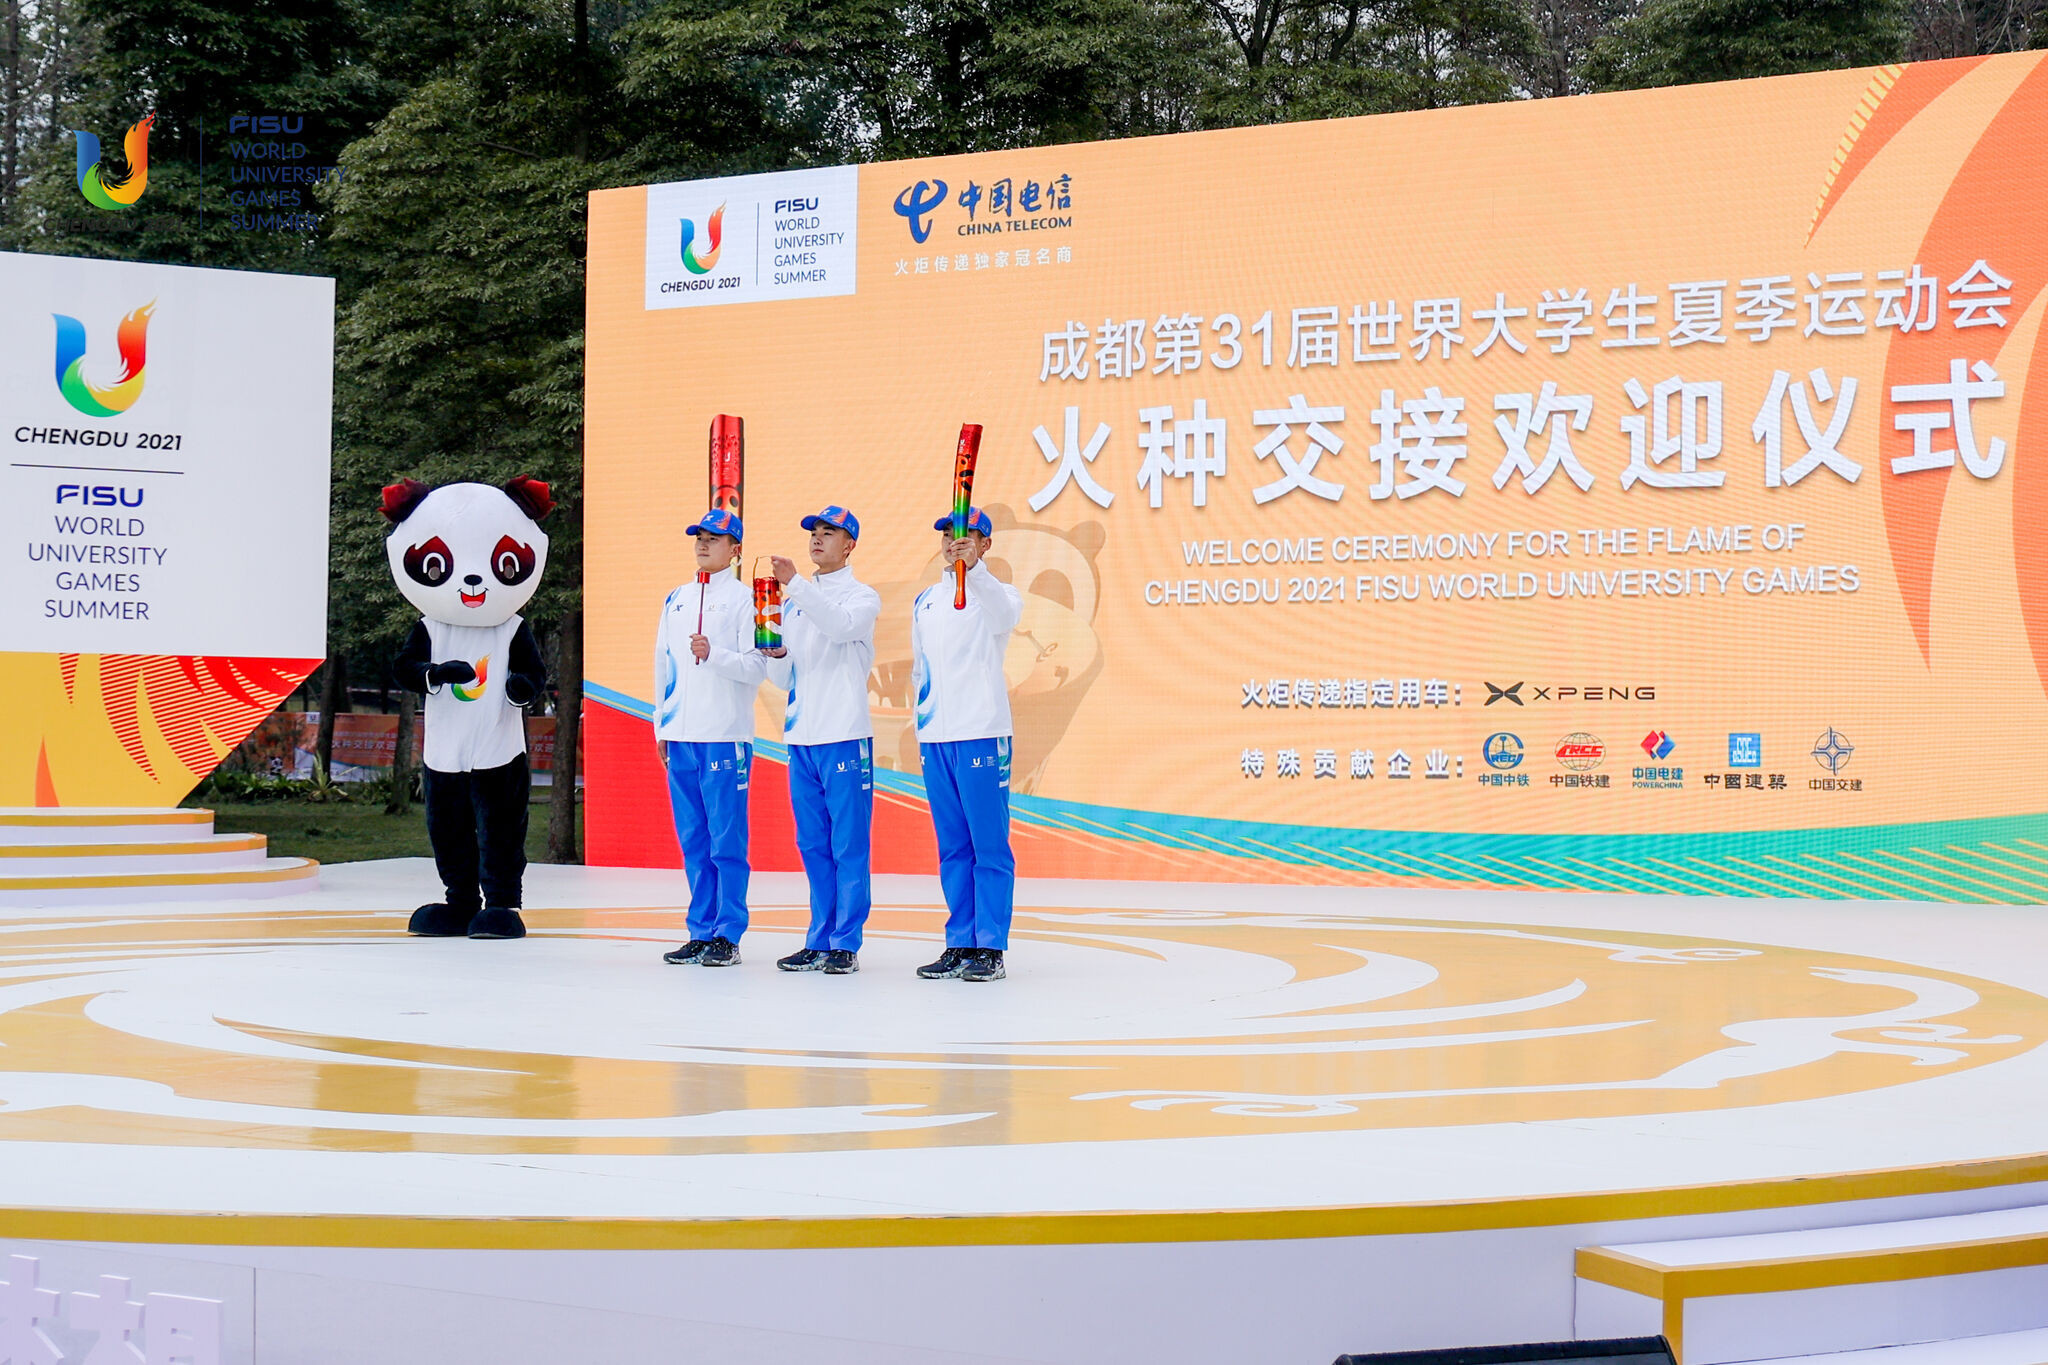 FISU Torch handover takes place in Chengdu prior to World University Games